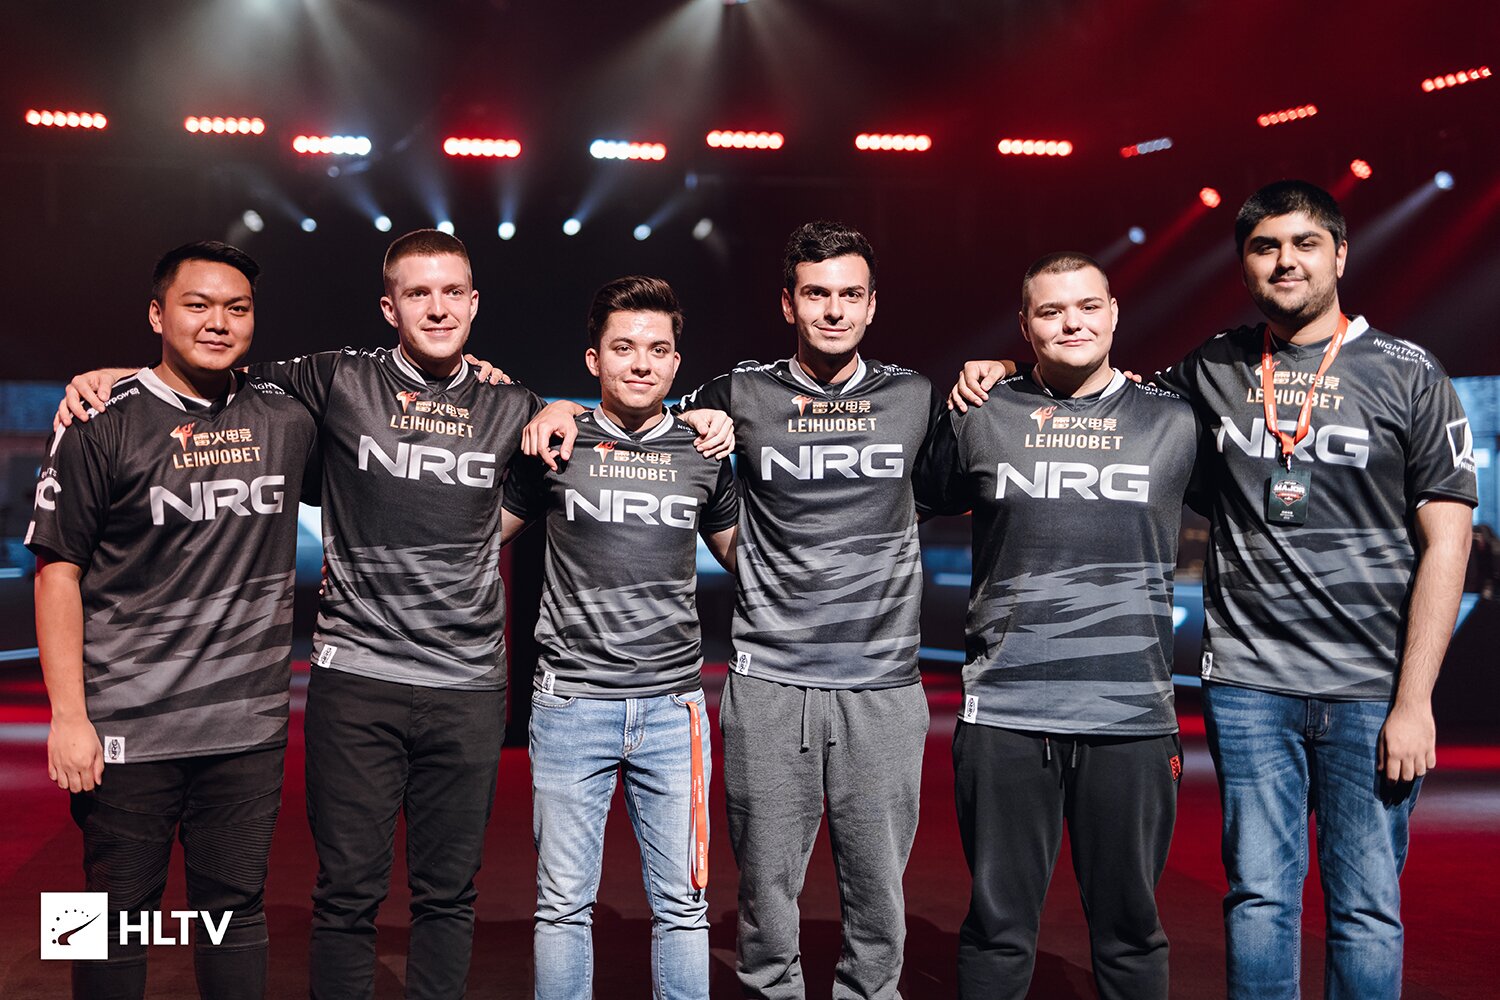 After a lengthy absence, Evil Geniuses has returned to Counter-Strike by acquiring the NRG roster (Photo via HLTV)